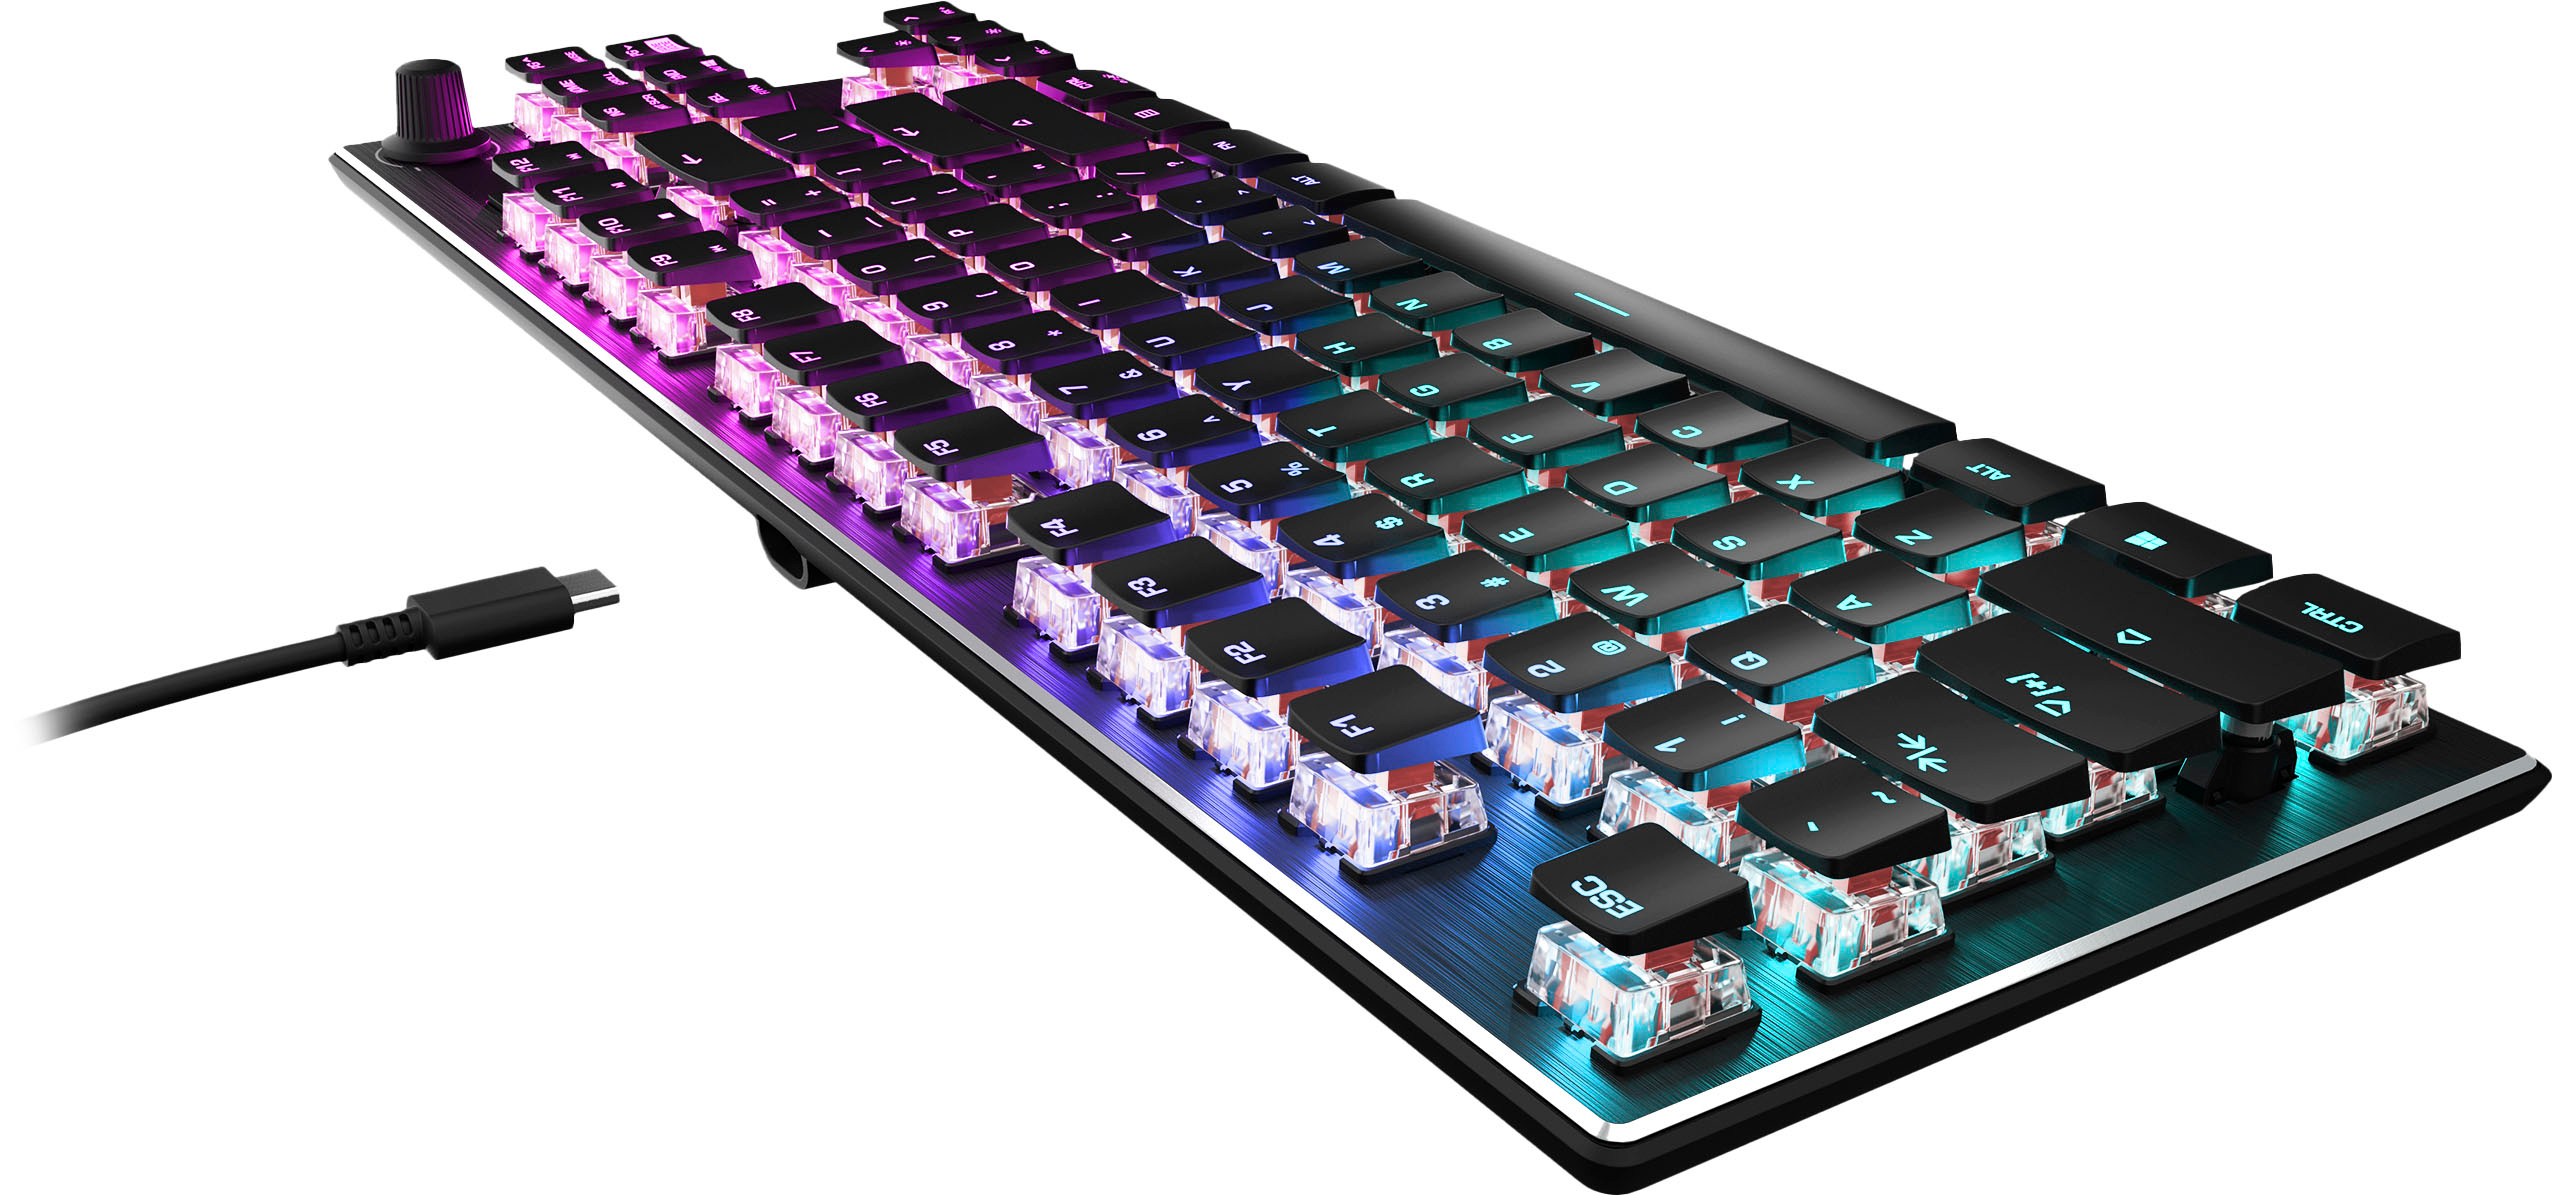 ROCCAT Vulcan 100 AIMO Mechanical PC Gaming Keyboard, RGB Lighting, Silent,  Per Key LED Illumination, Brown Switches, Aluminum Top Plate, Silver